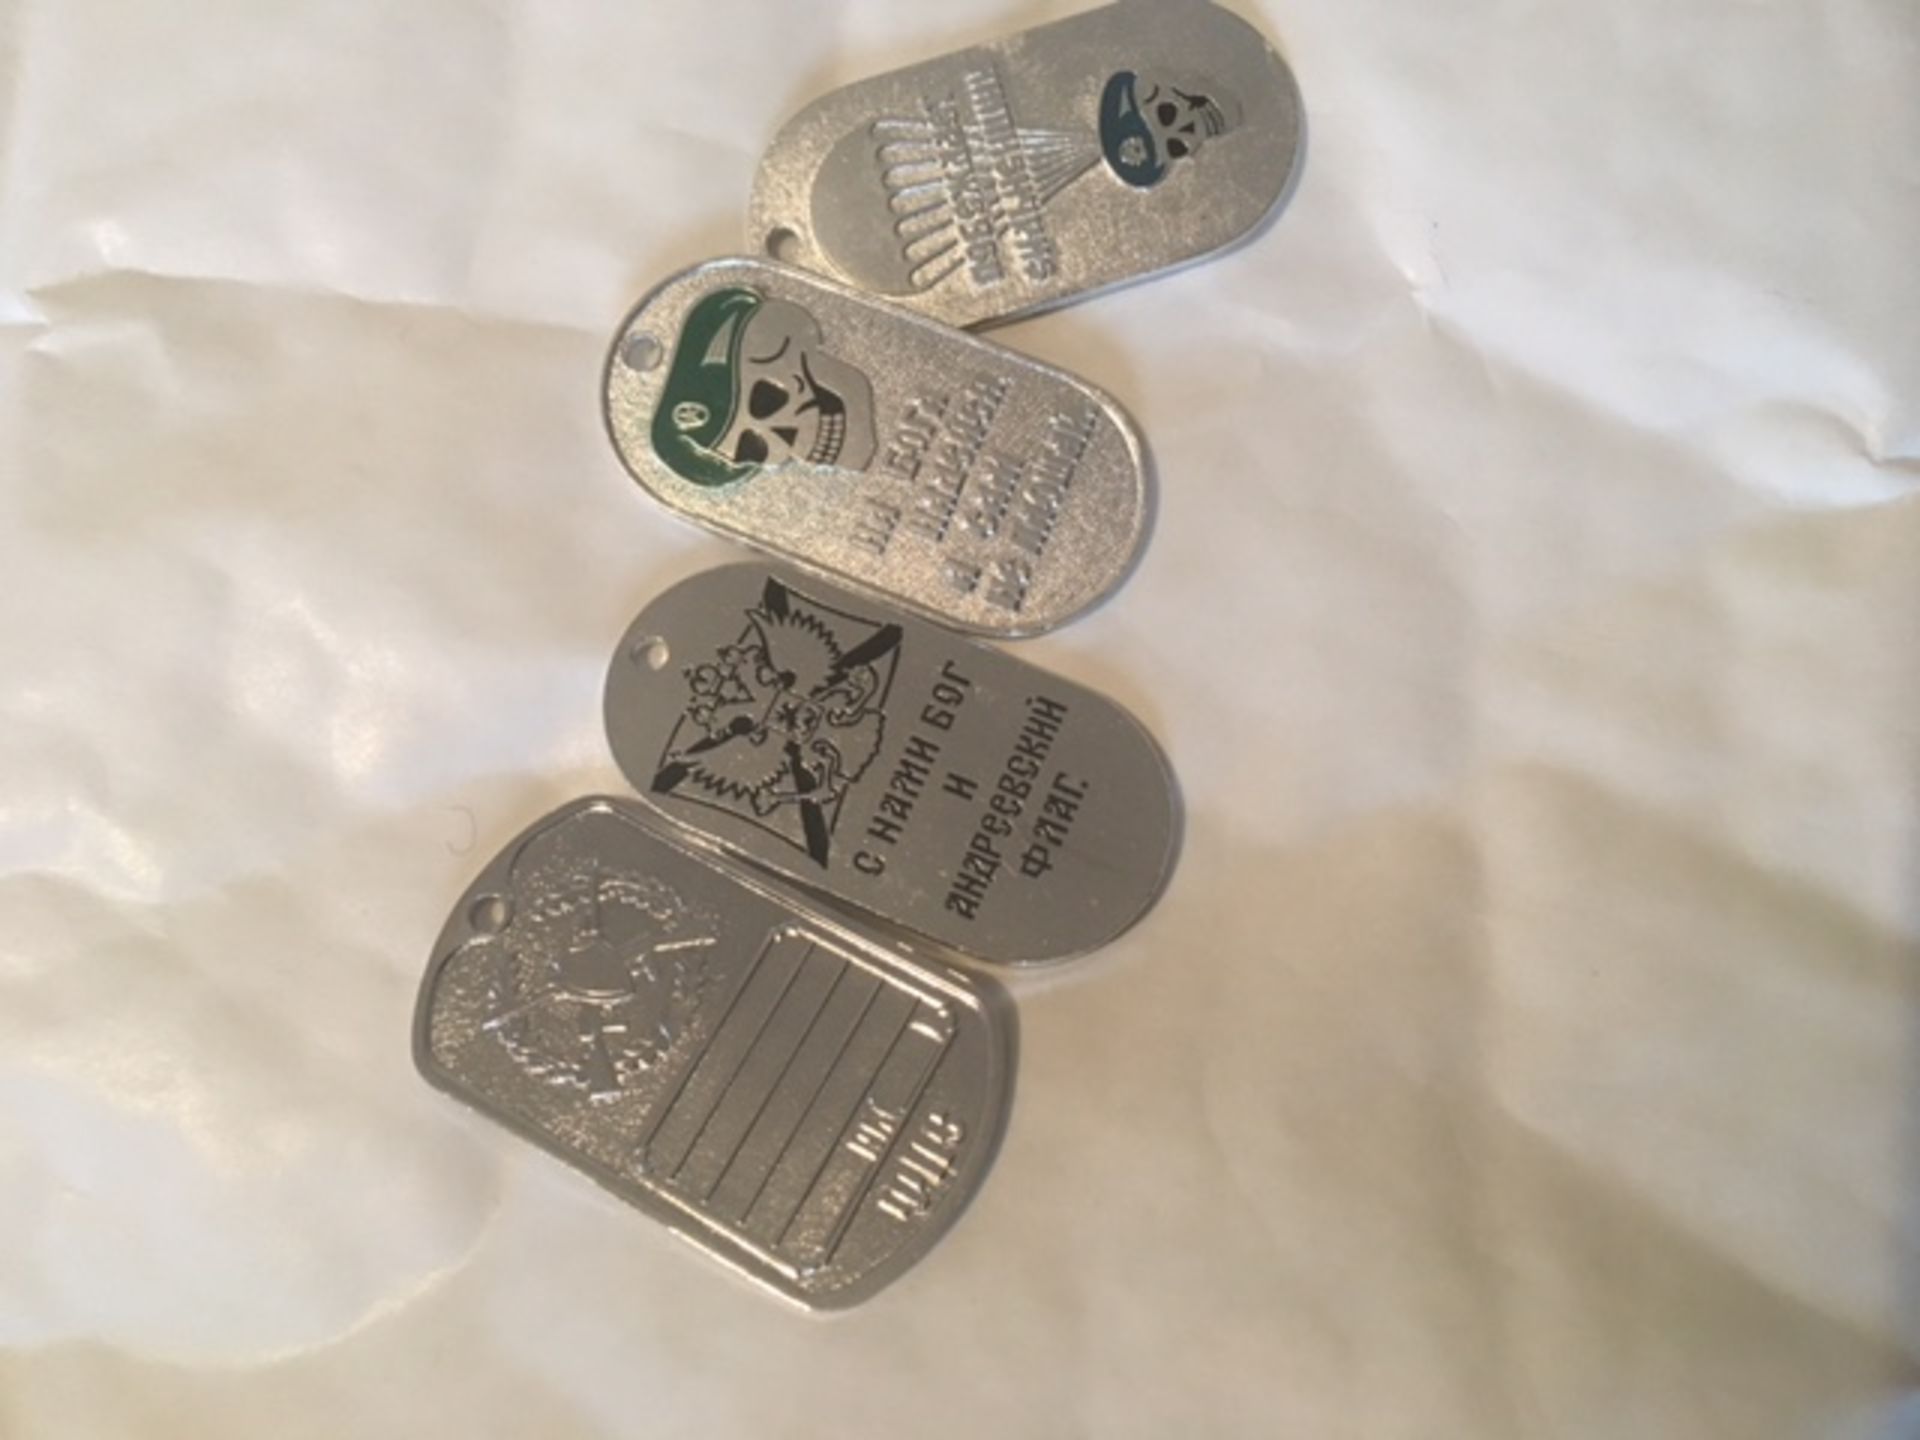 russian special forces dog tags - Image 2 of 2